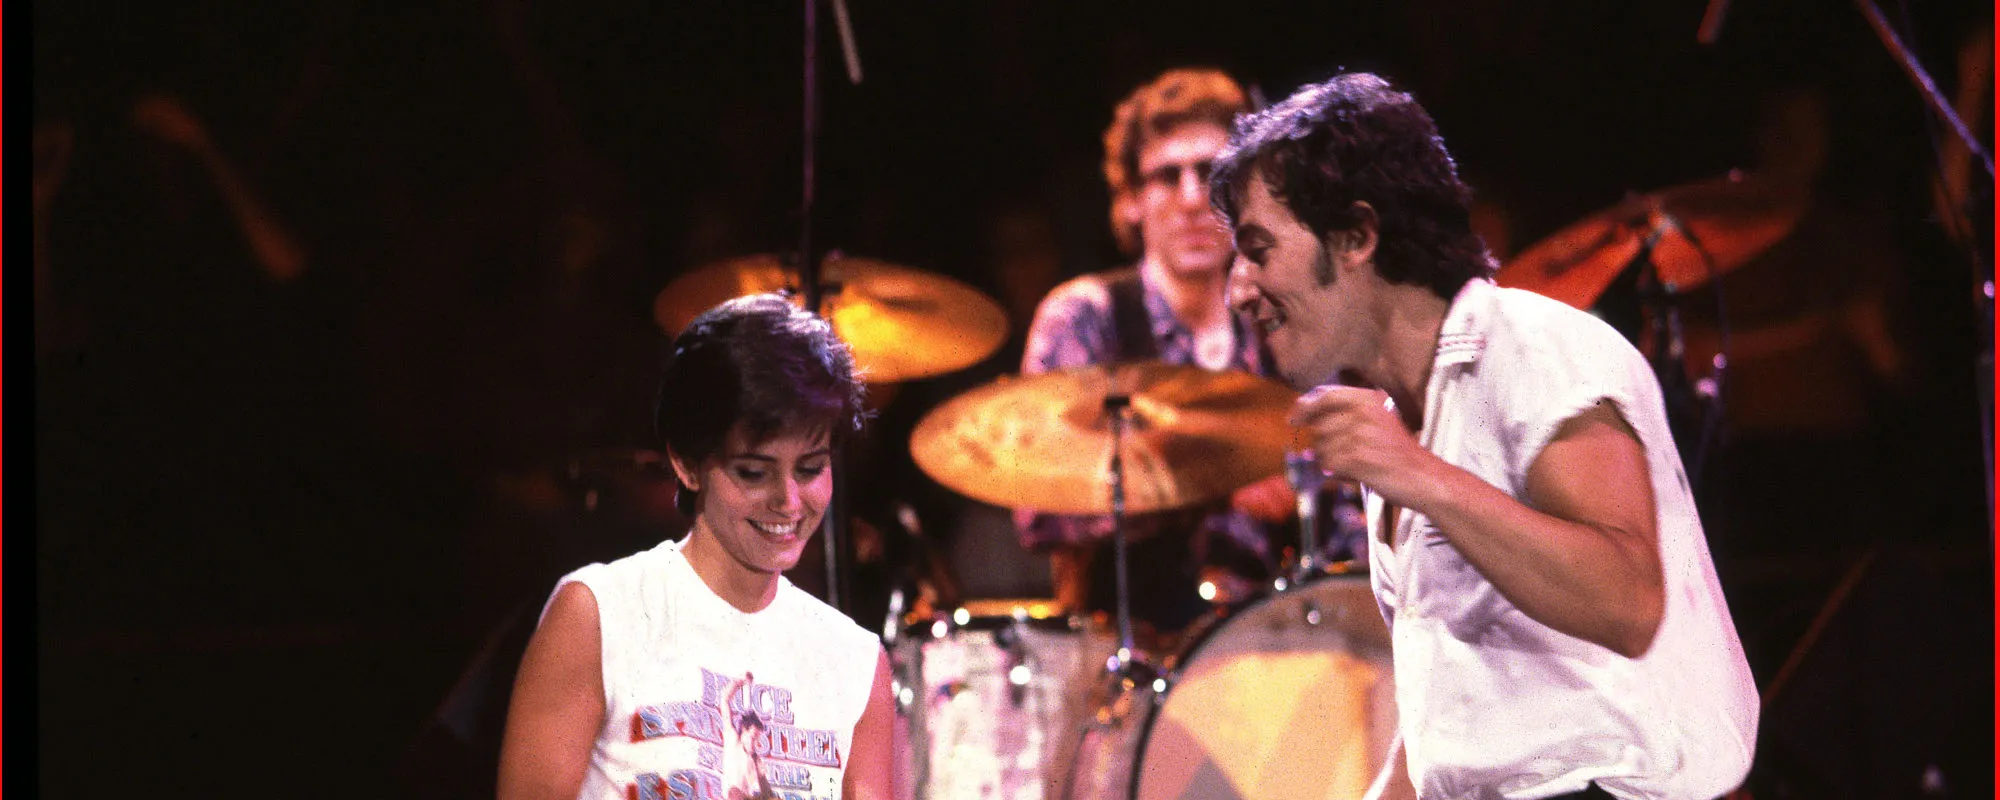 The Story Behind How “Dancing in the Dark” by Bruce Springsteen Came to Be